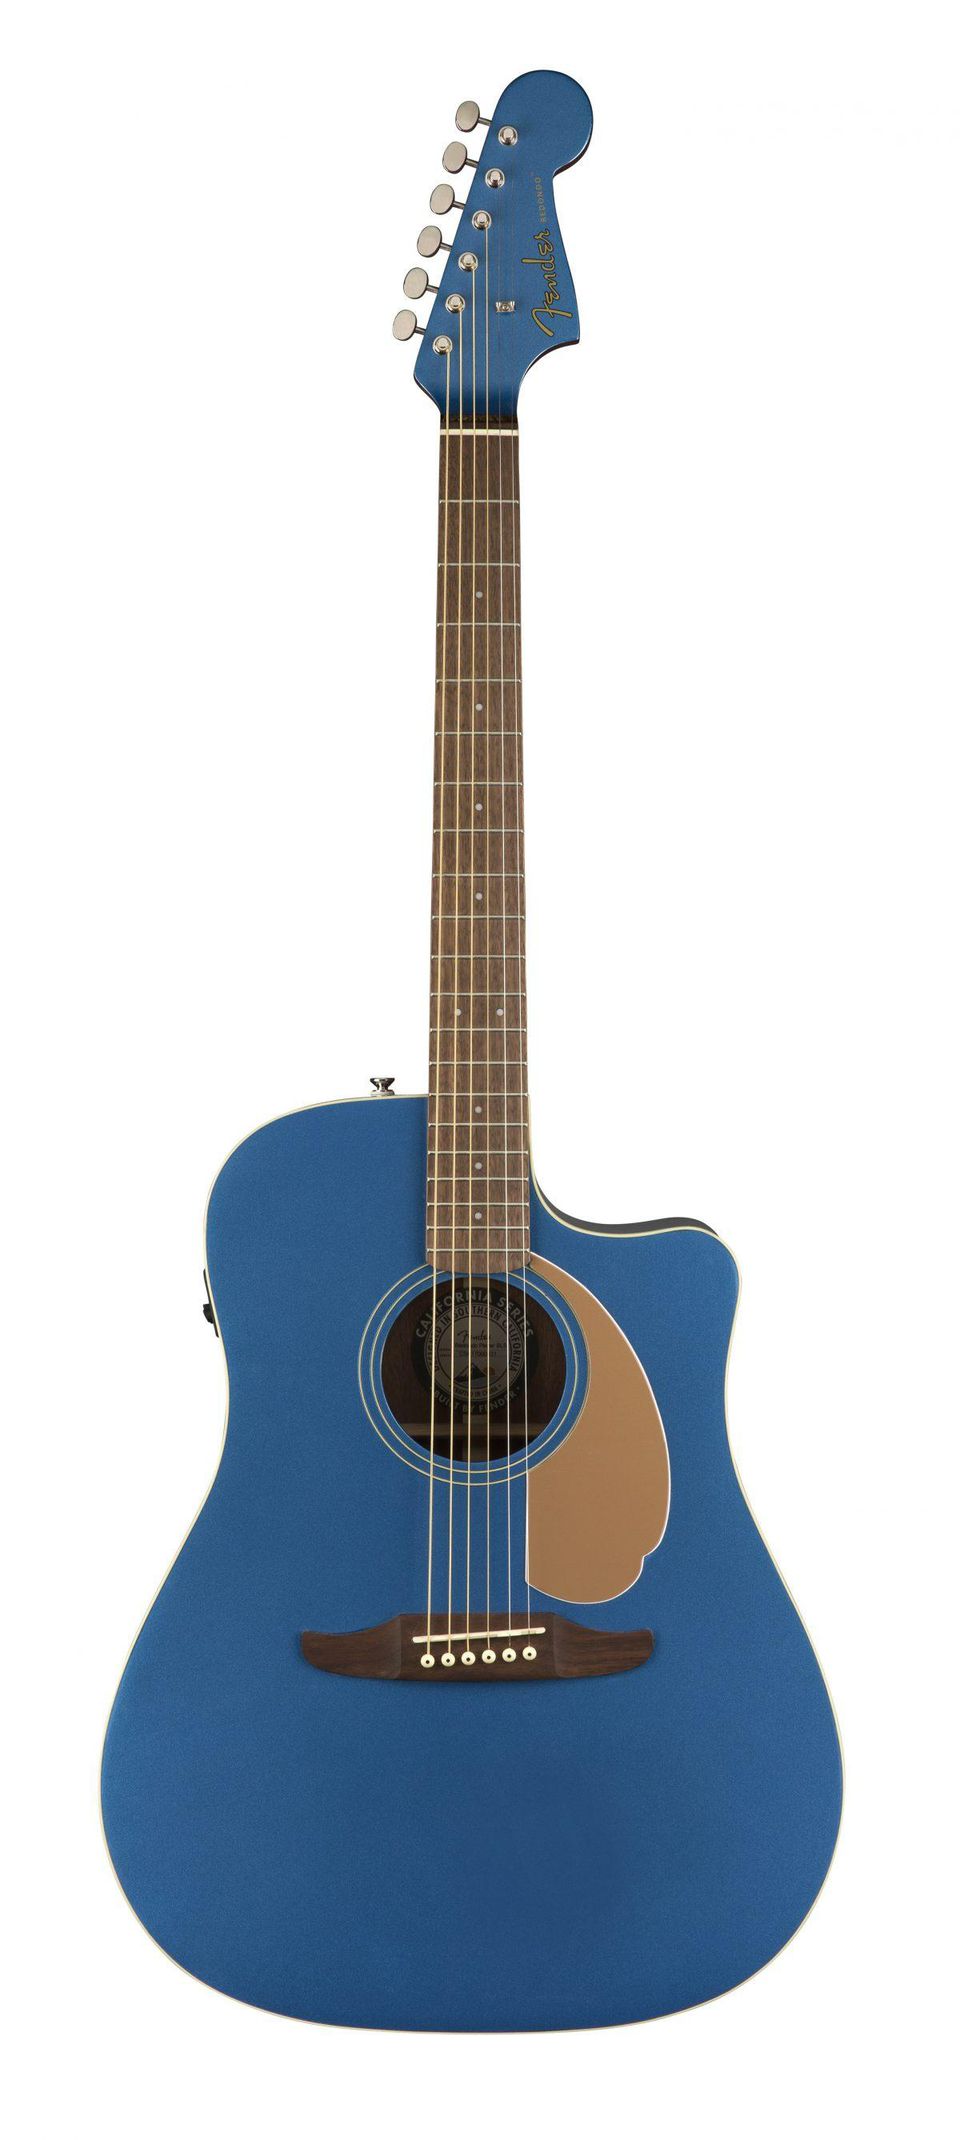 Fenders new California Series Redondo Player acoustic guitar in Belmont Blue